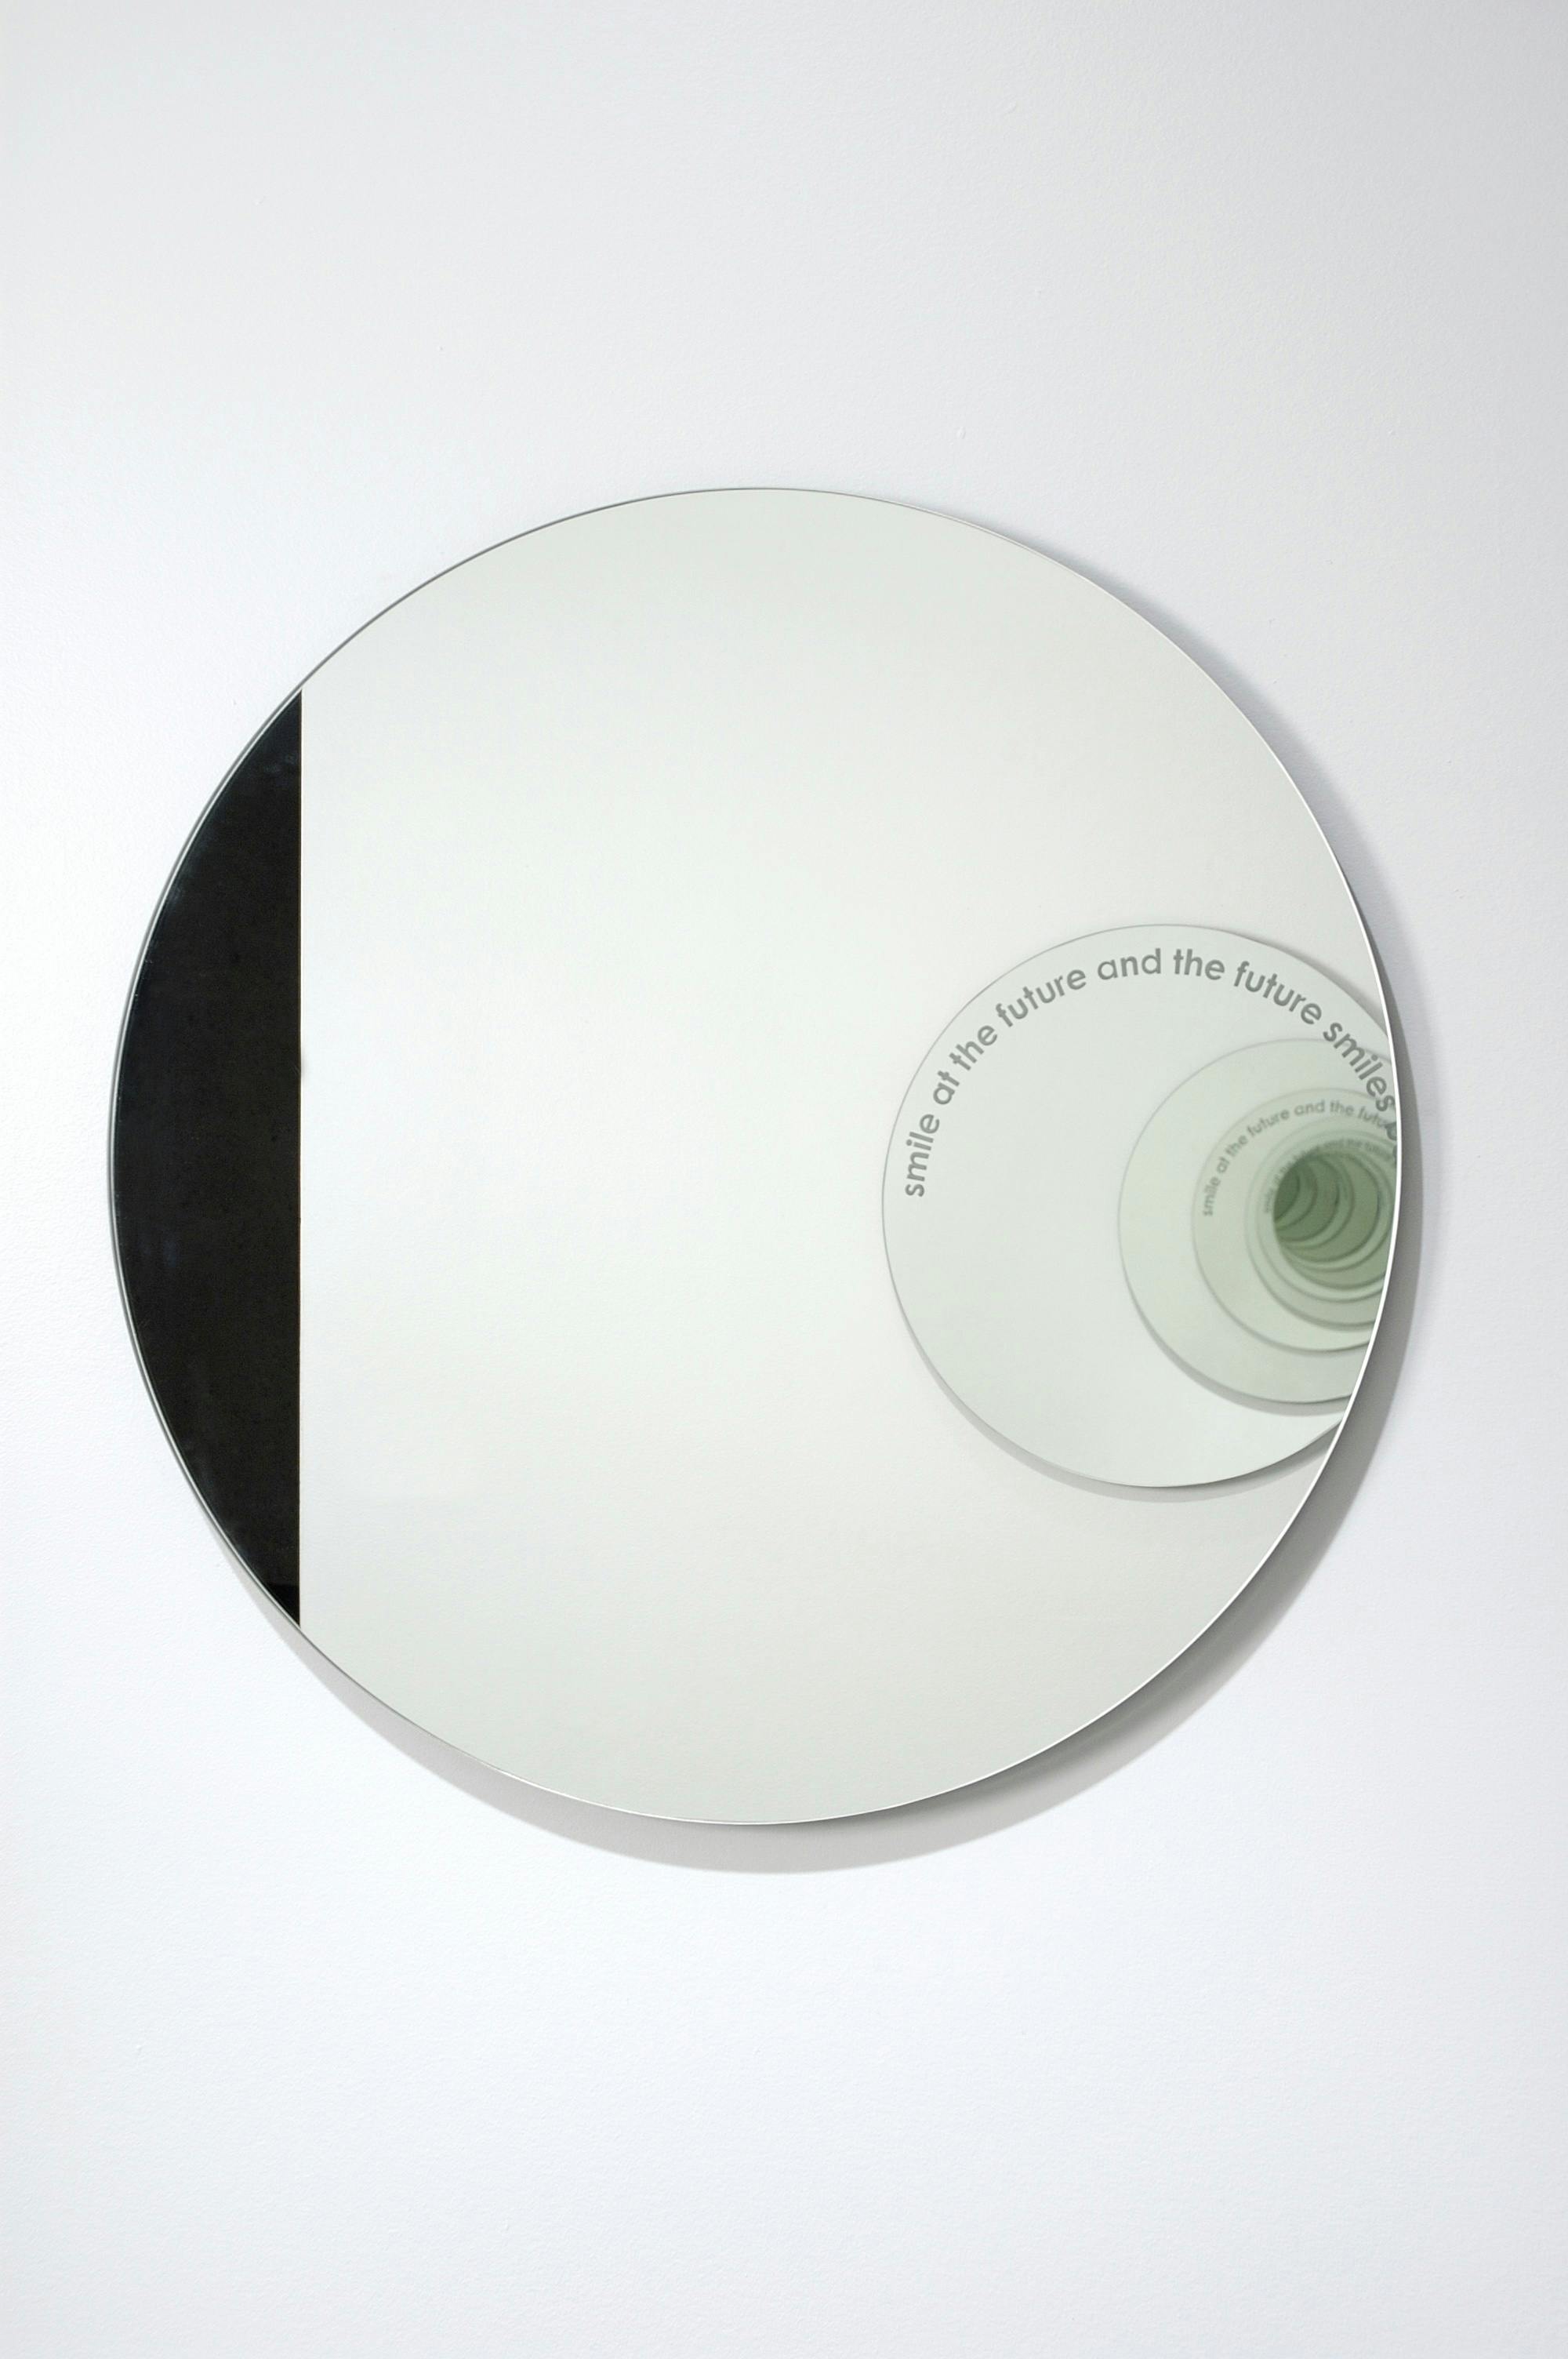 A circular-shaped large mirror is mounted on a gallery wall. It reflects another circular mirror attached to the facing wall. There is a text printed on another mirror.